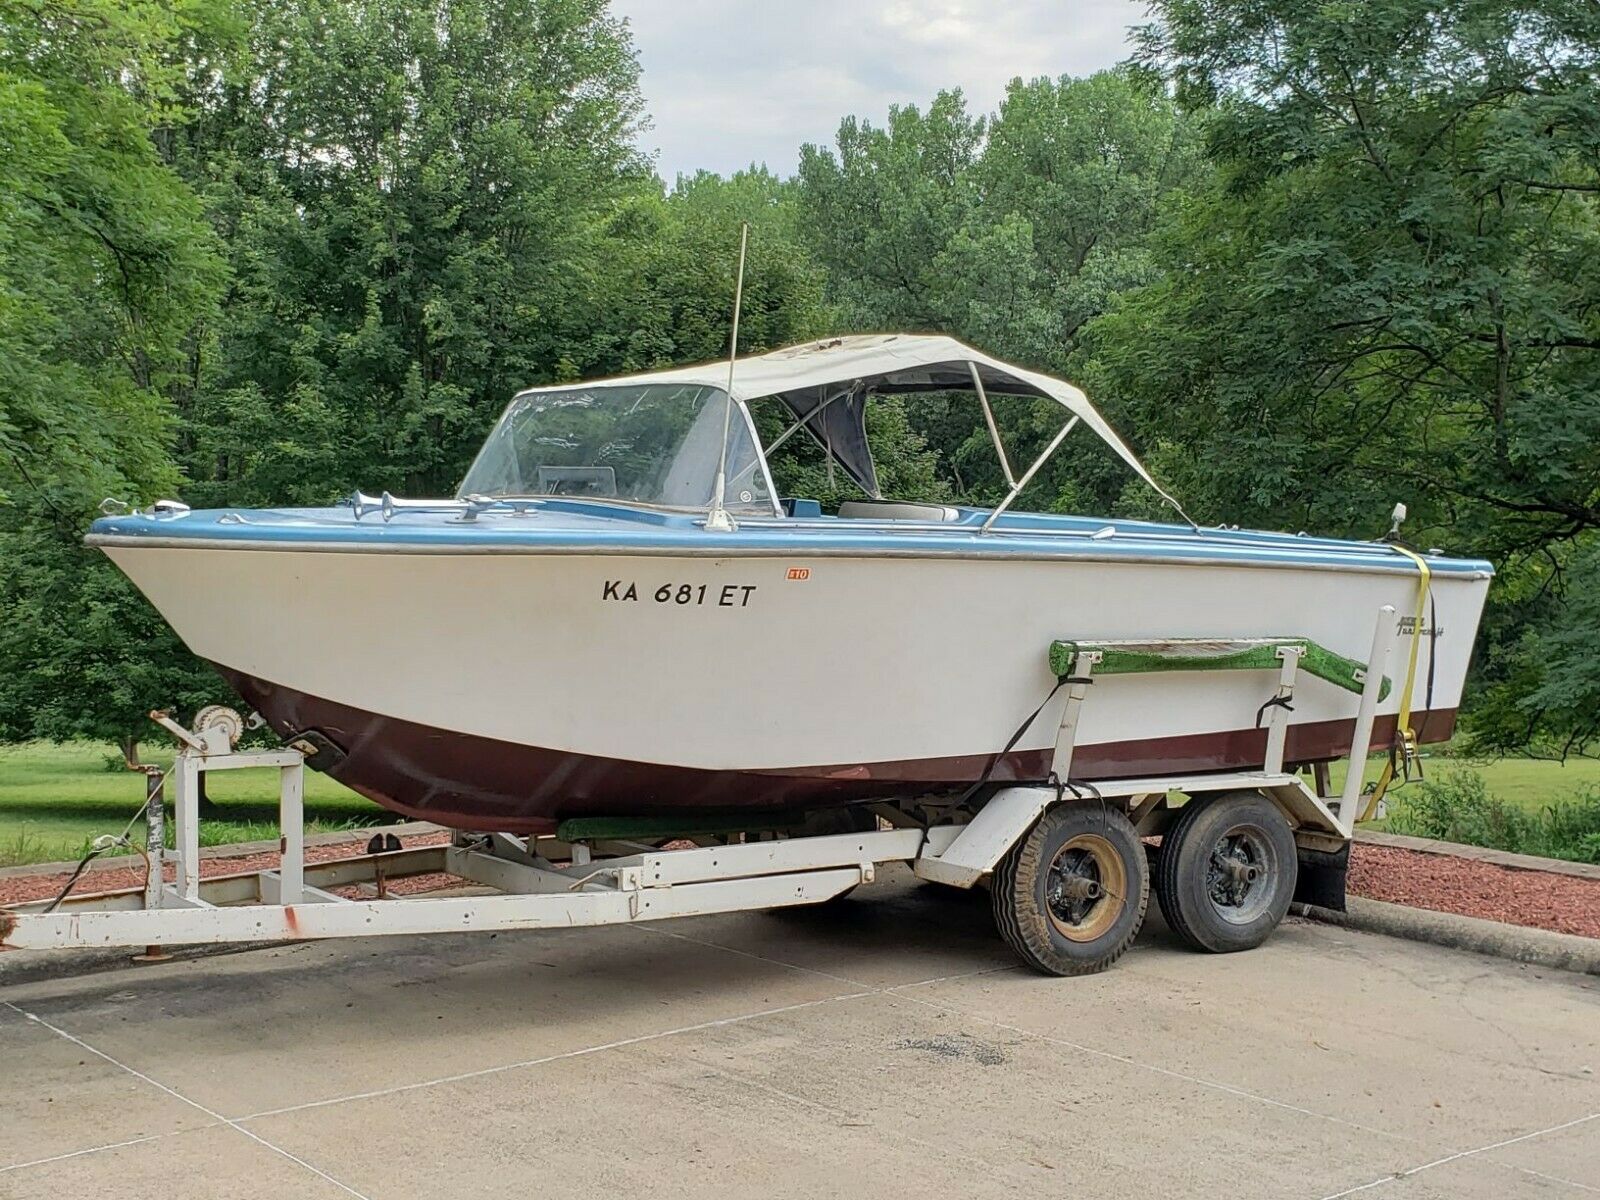 Buehler Turbocraft 1966 for sale for $2,650 - Boats-from-USA.com